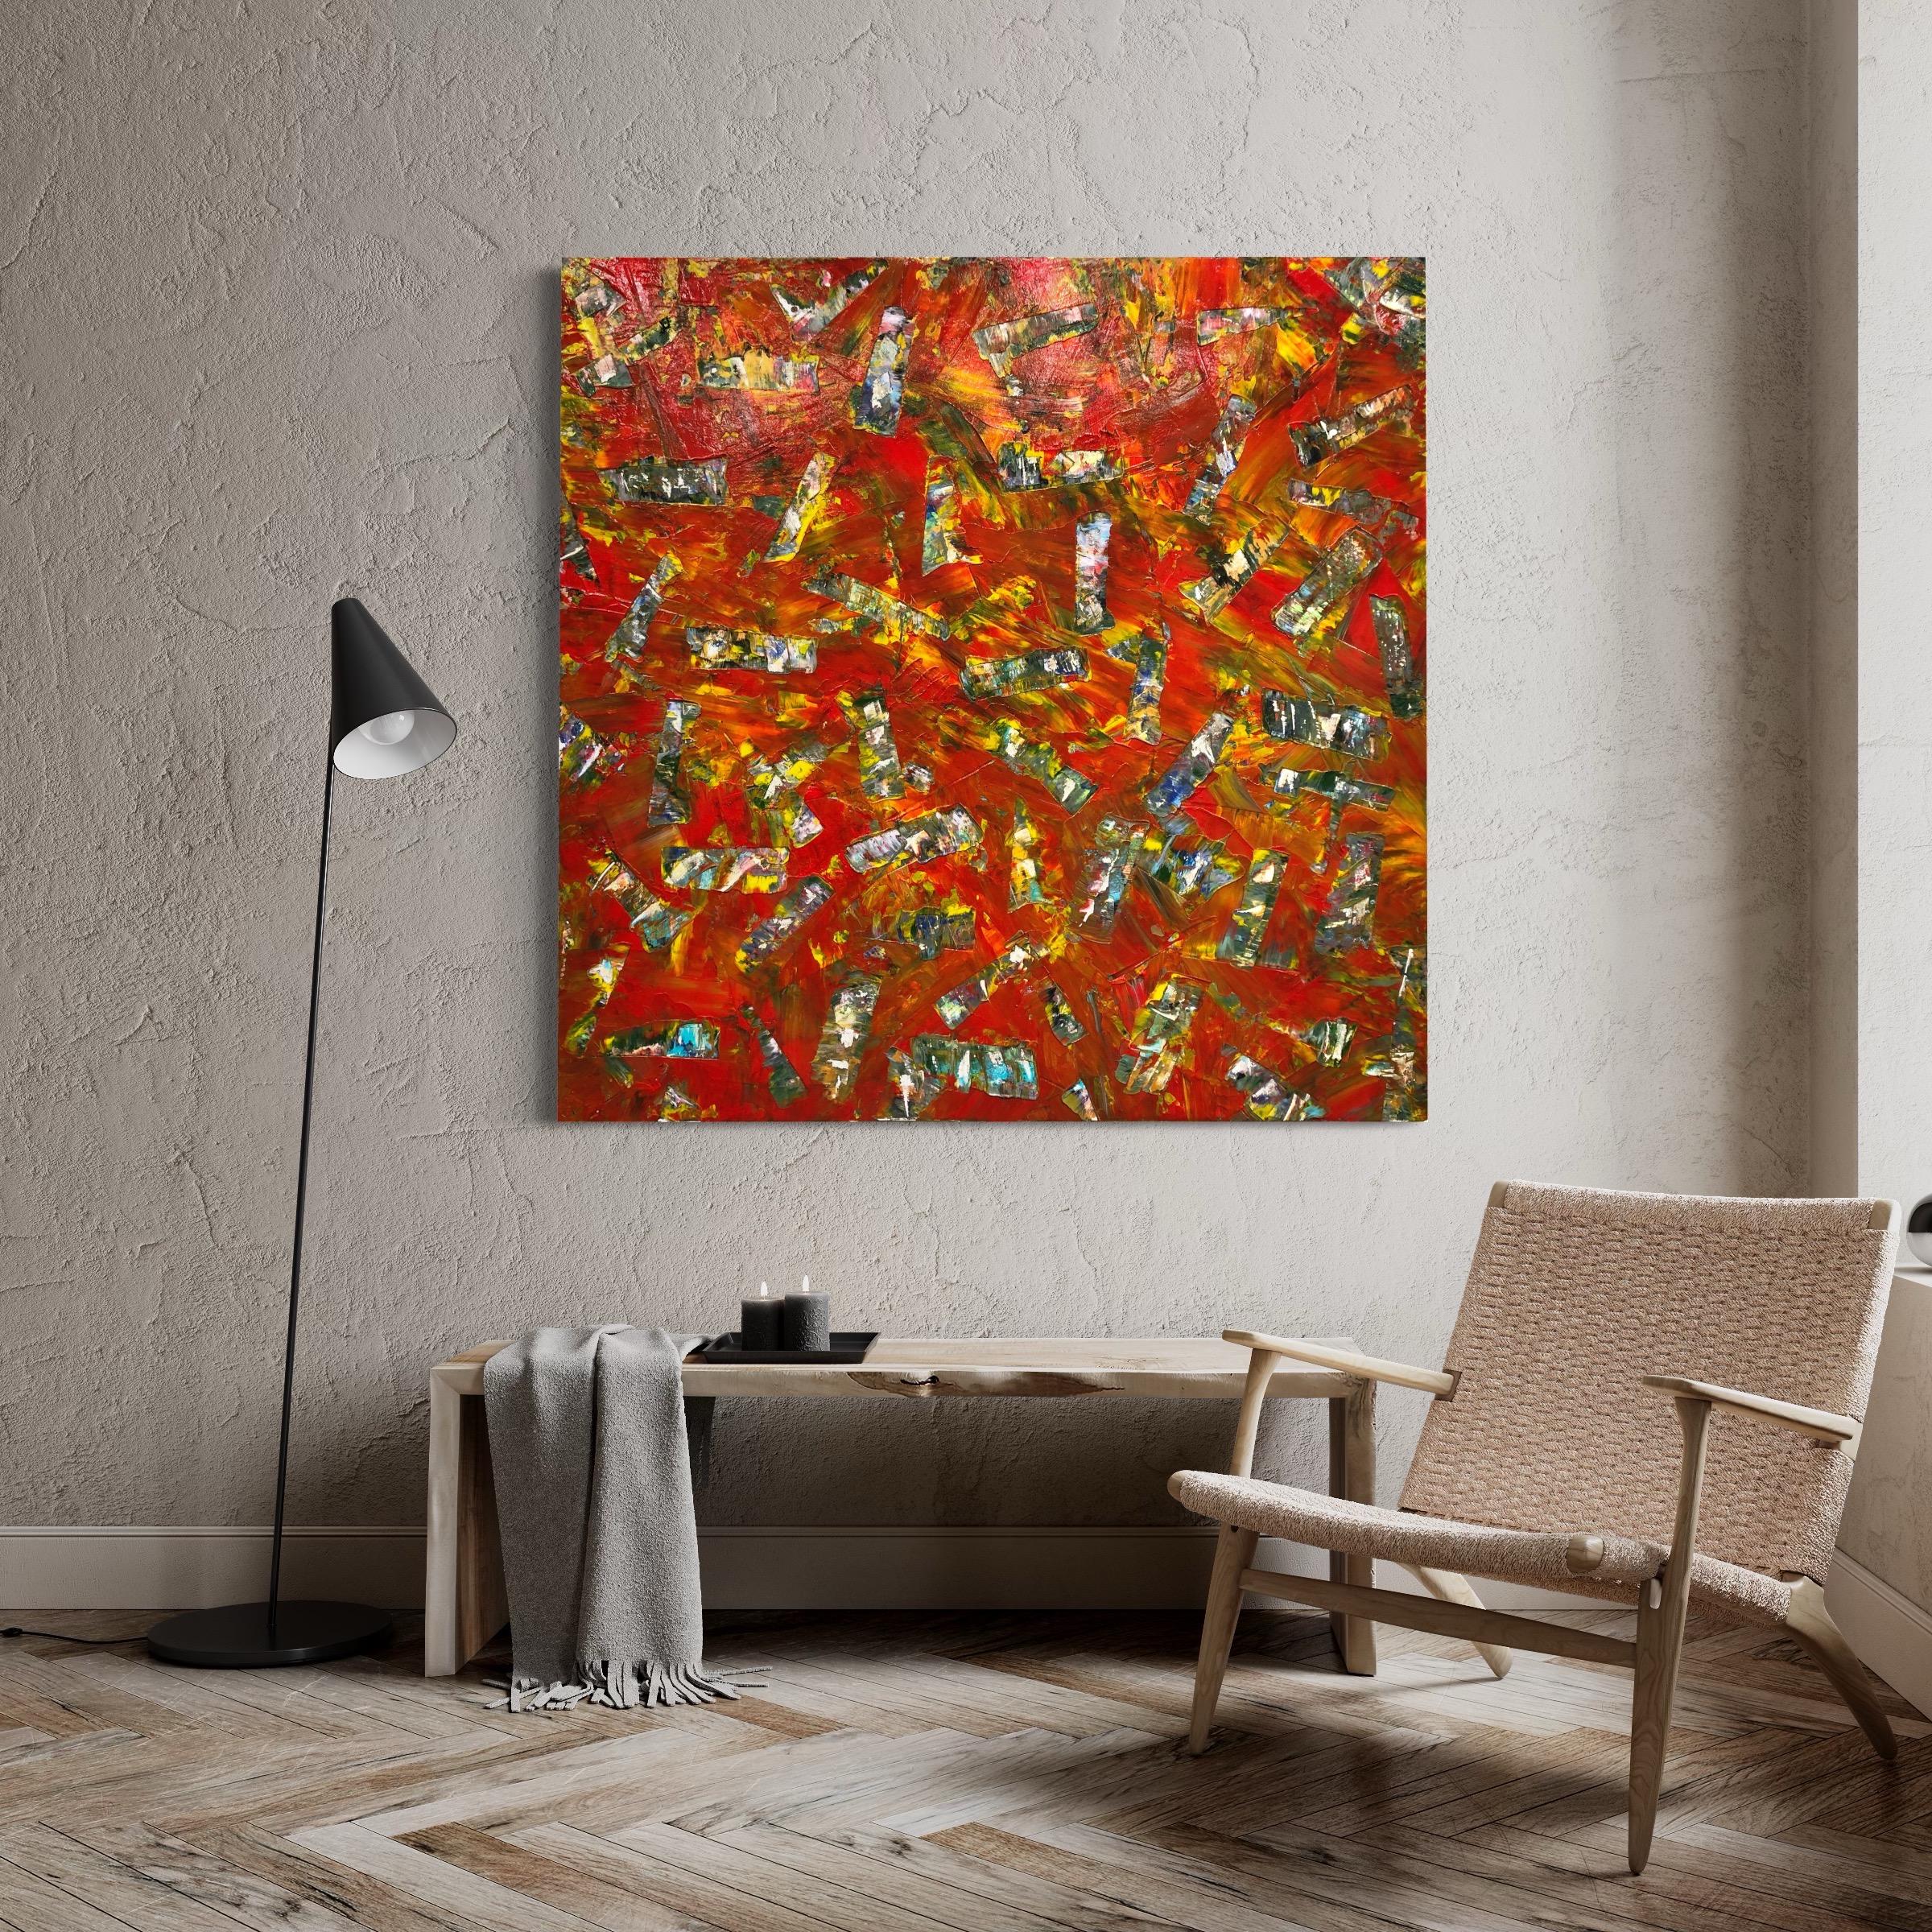 Burning Ember is painted on a wood panel, in acrylic. The size is 40